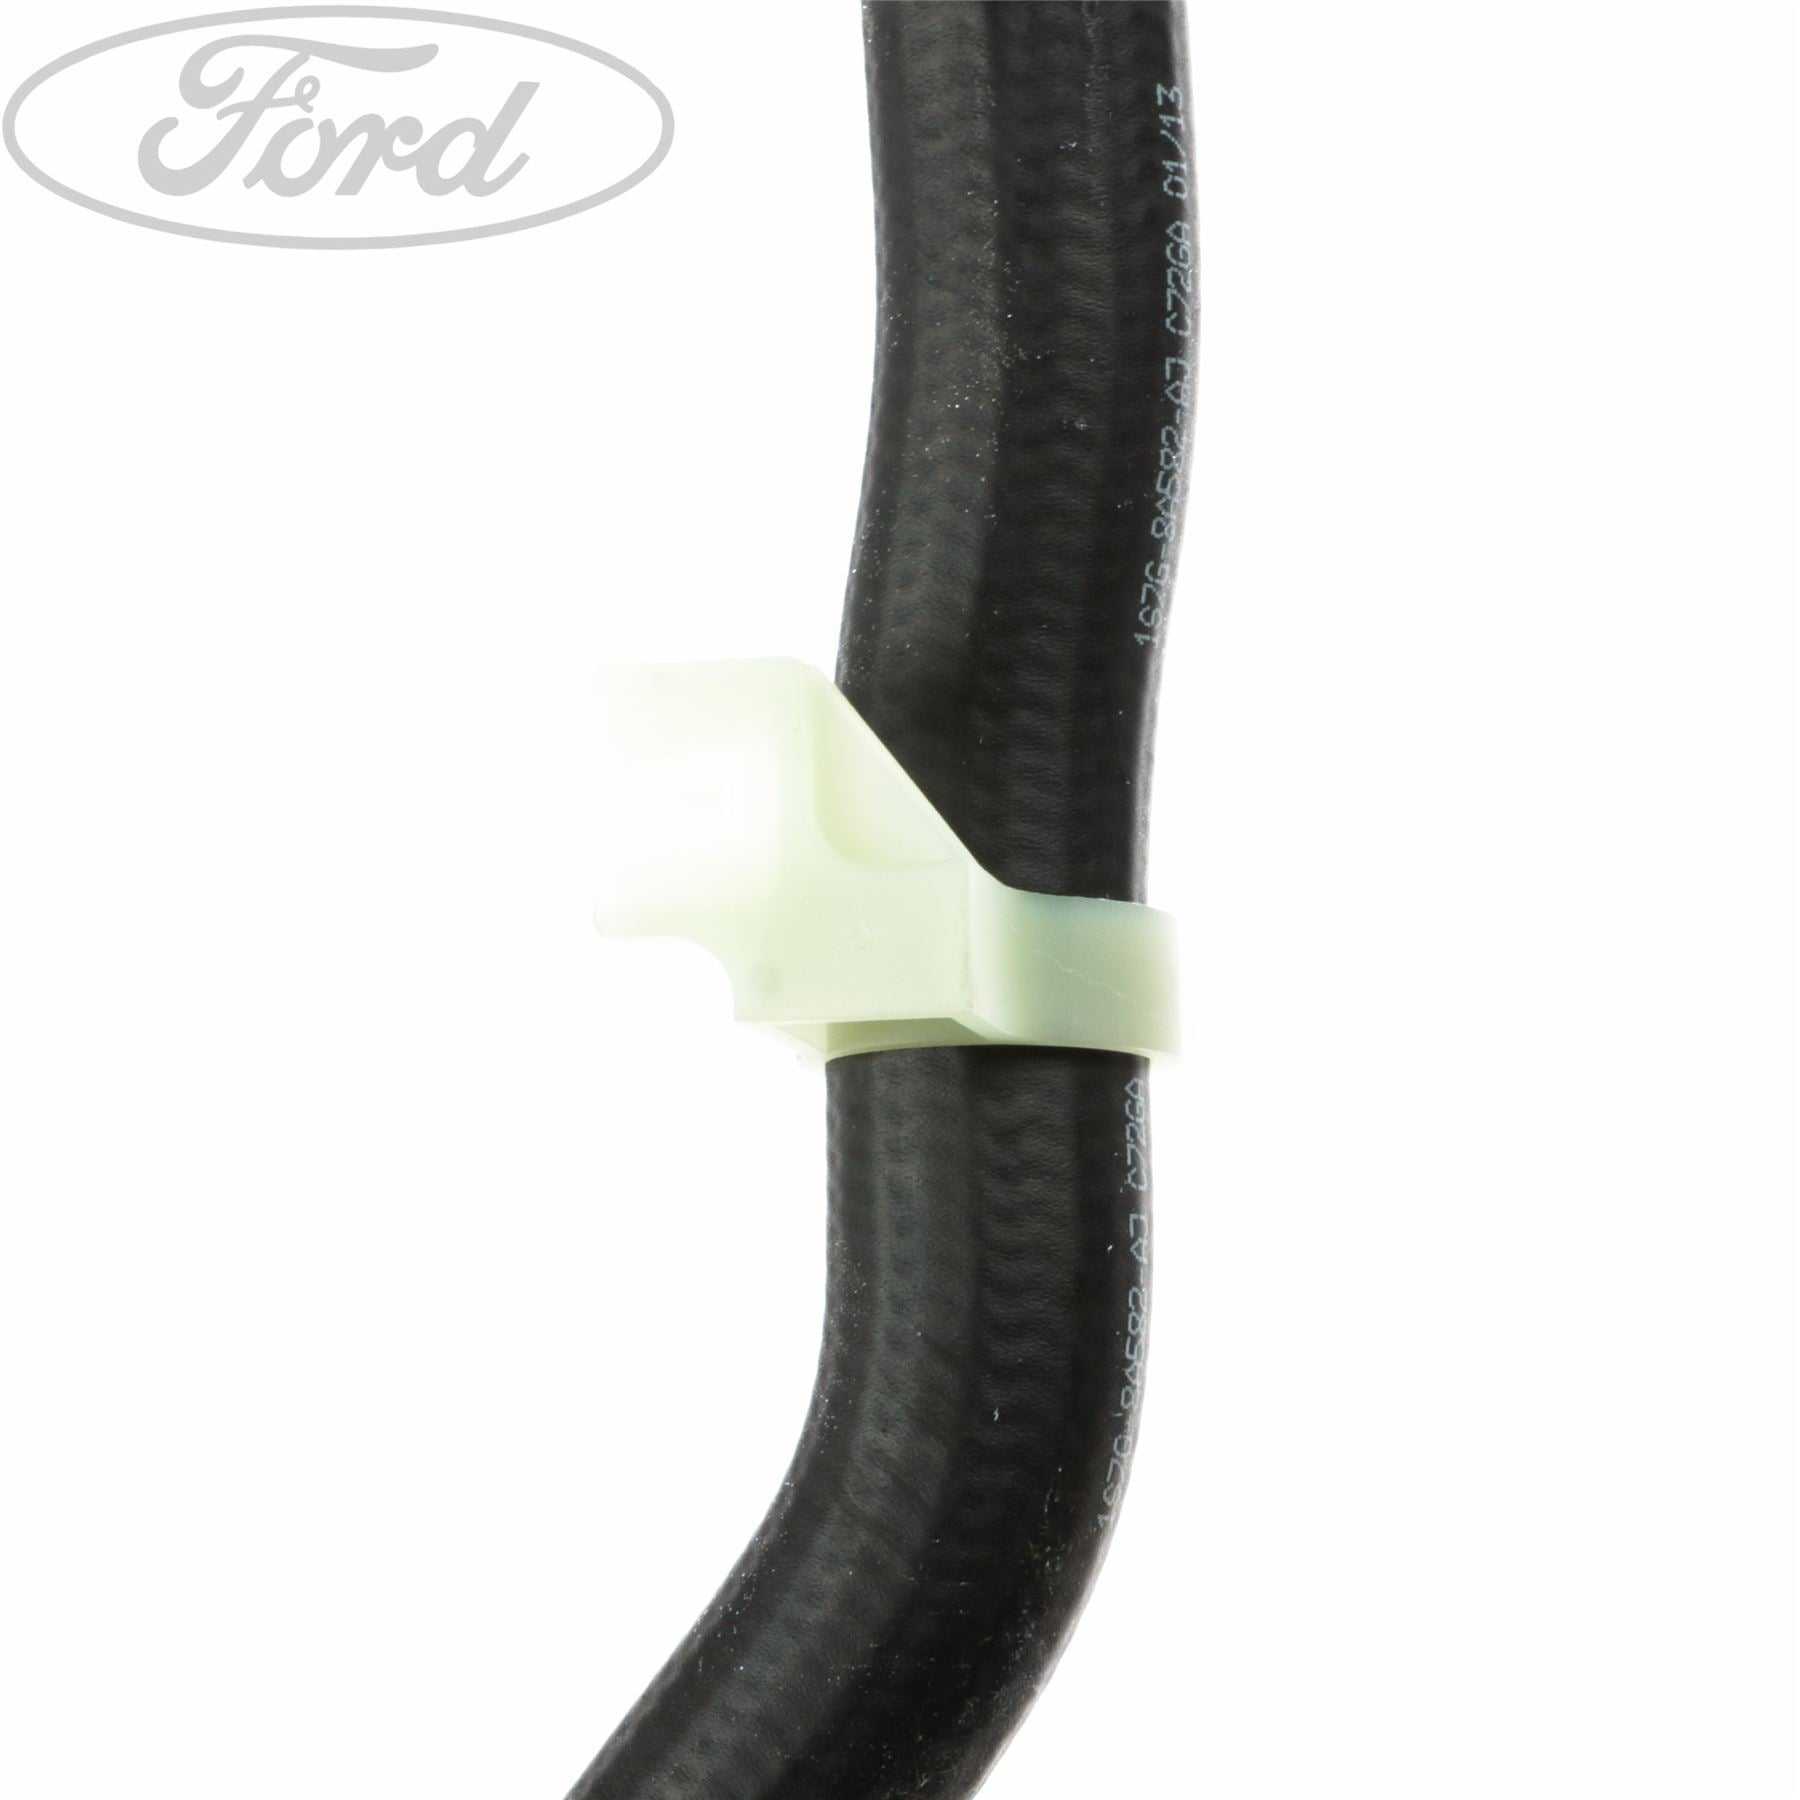 Ford, THERMOSTAT HOSE